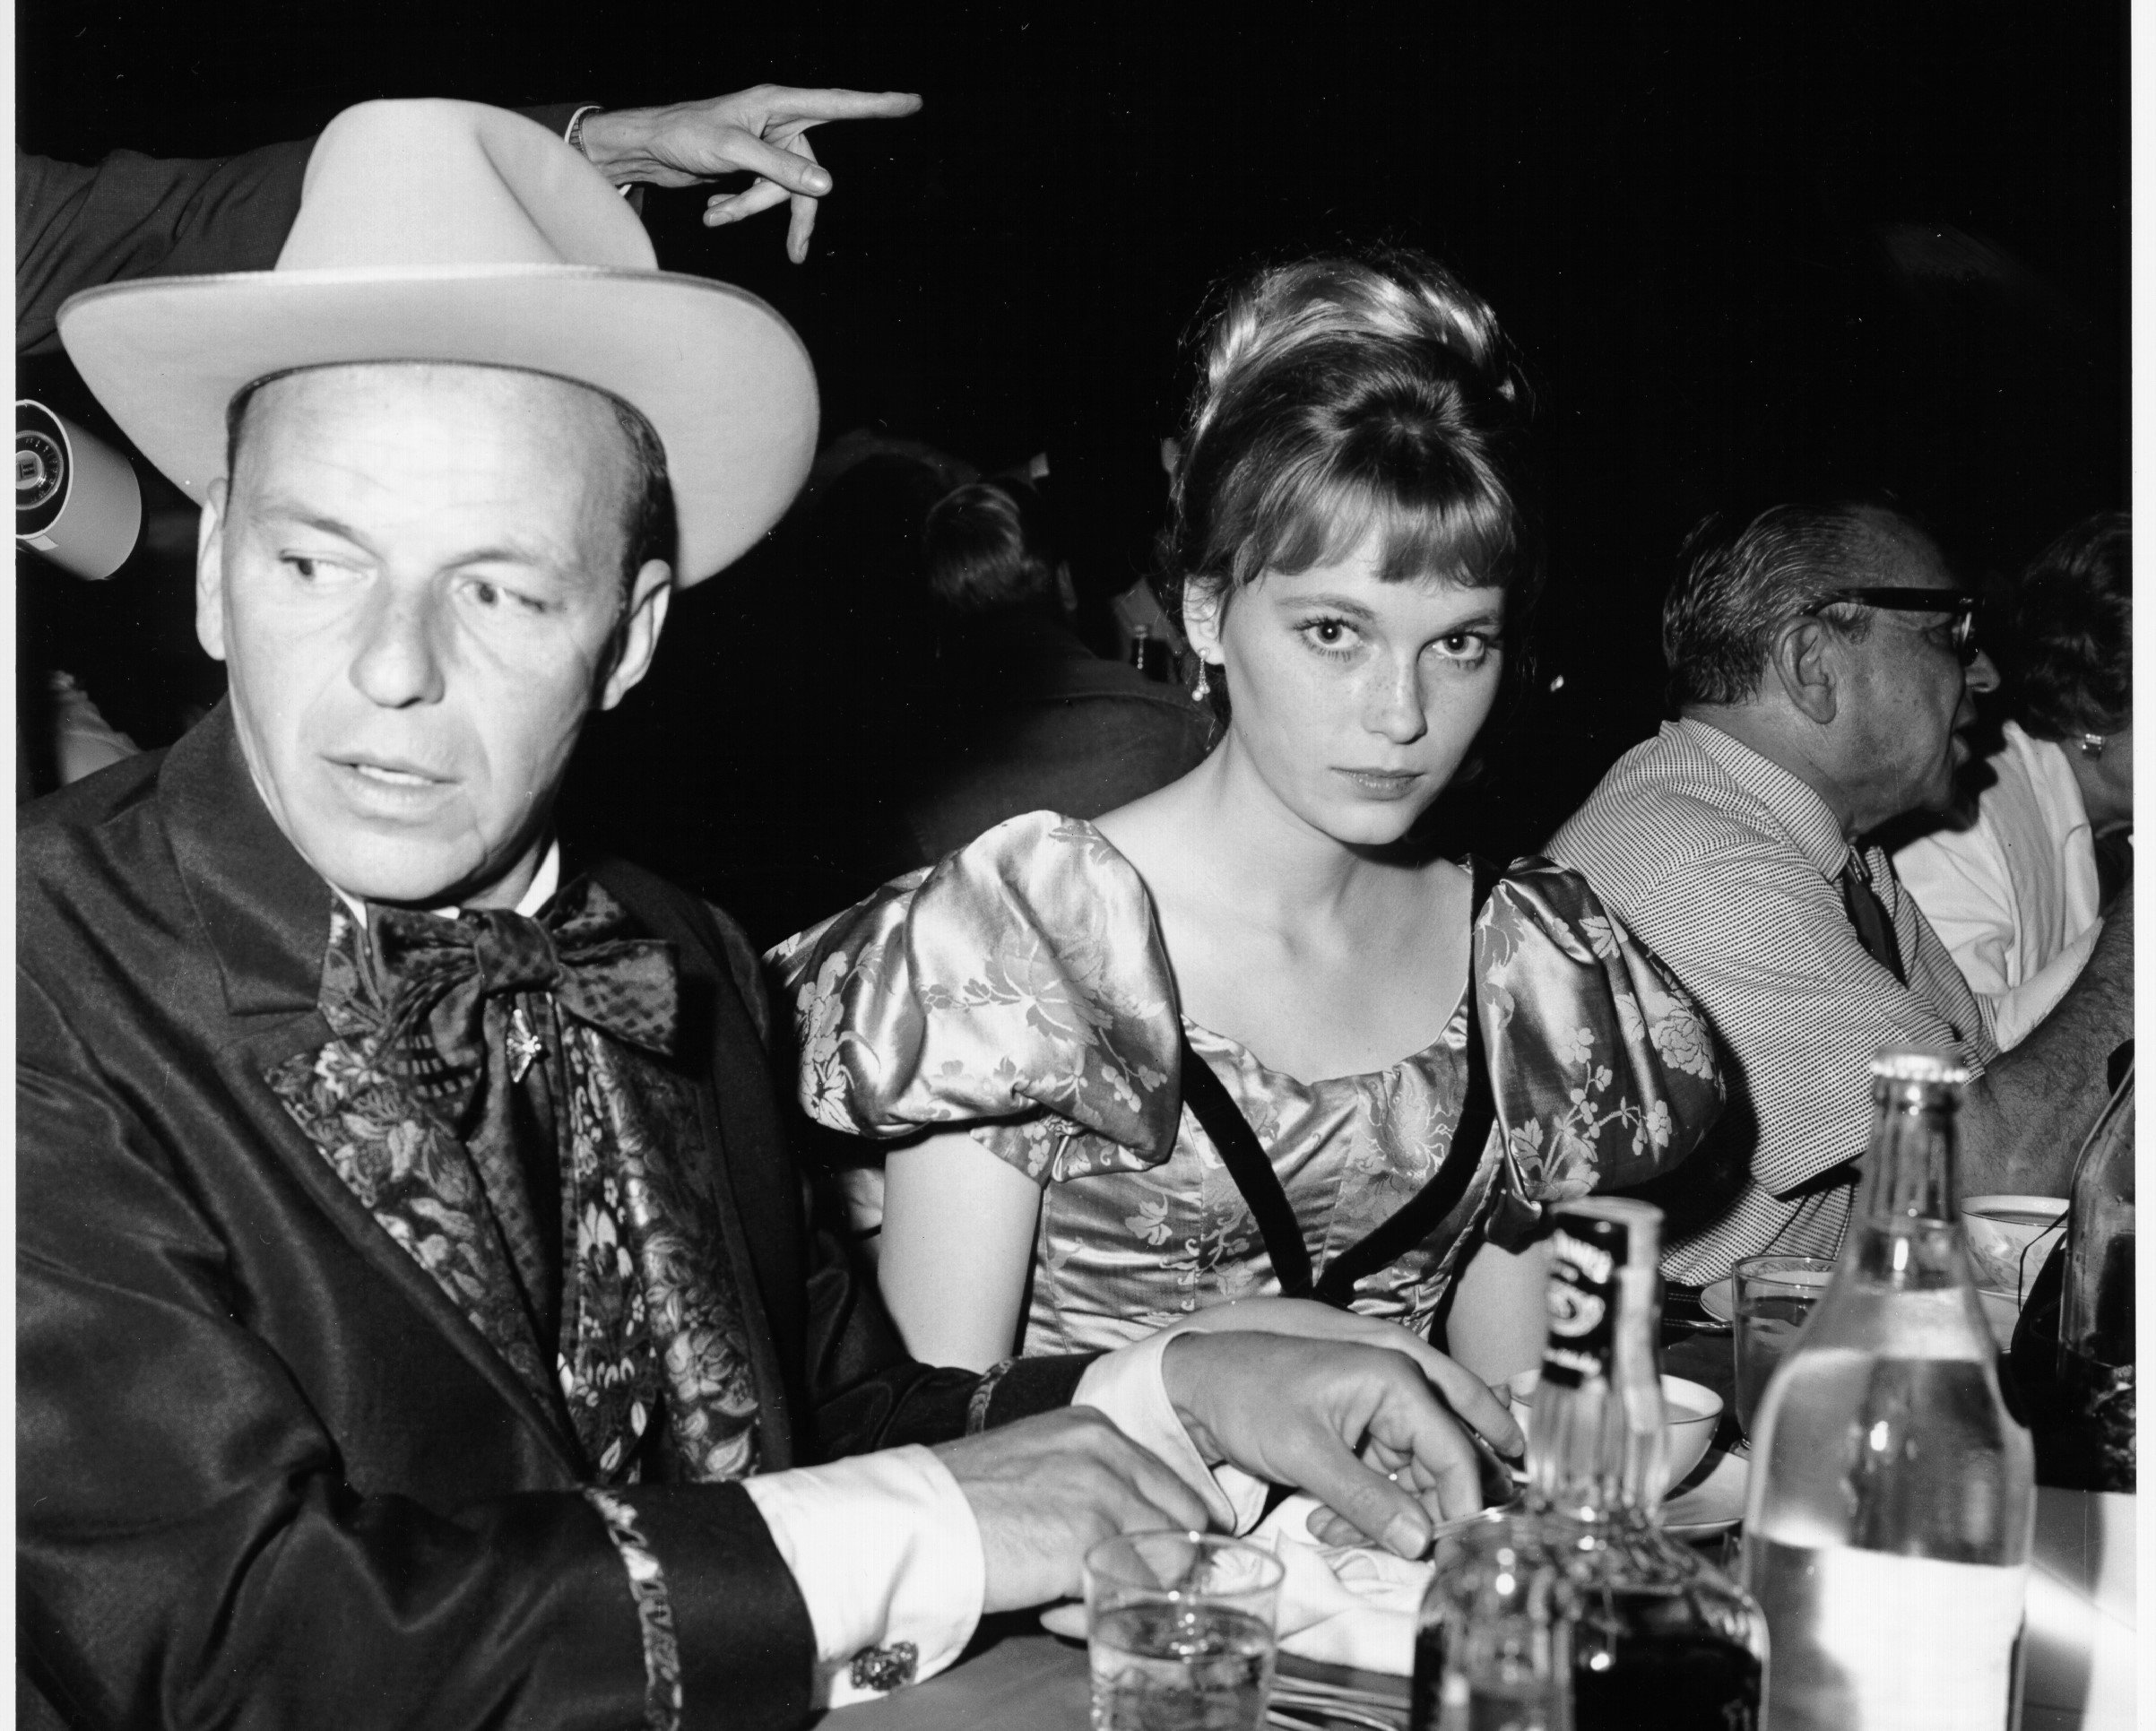 A black and white photo of Frank Sinatra and Mia Farrow sitting at a table. He wears a hat and she wears a dress with poofed sleeves.